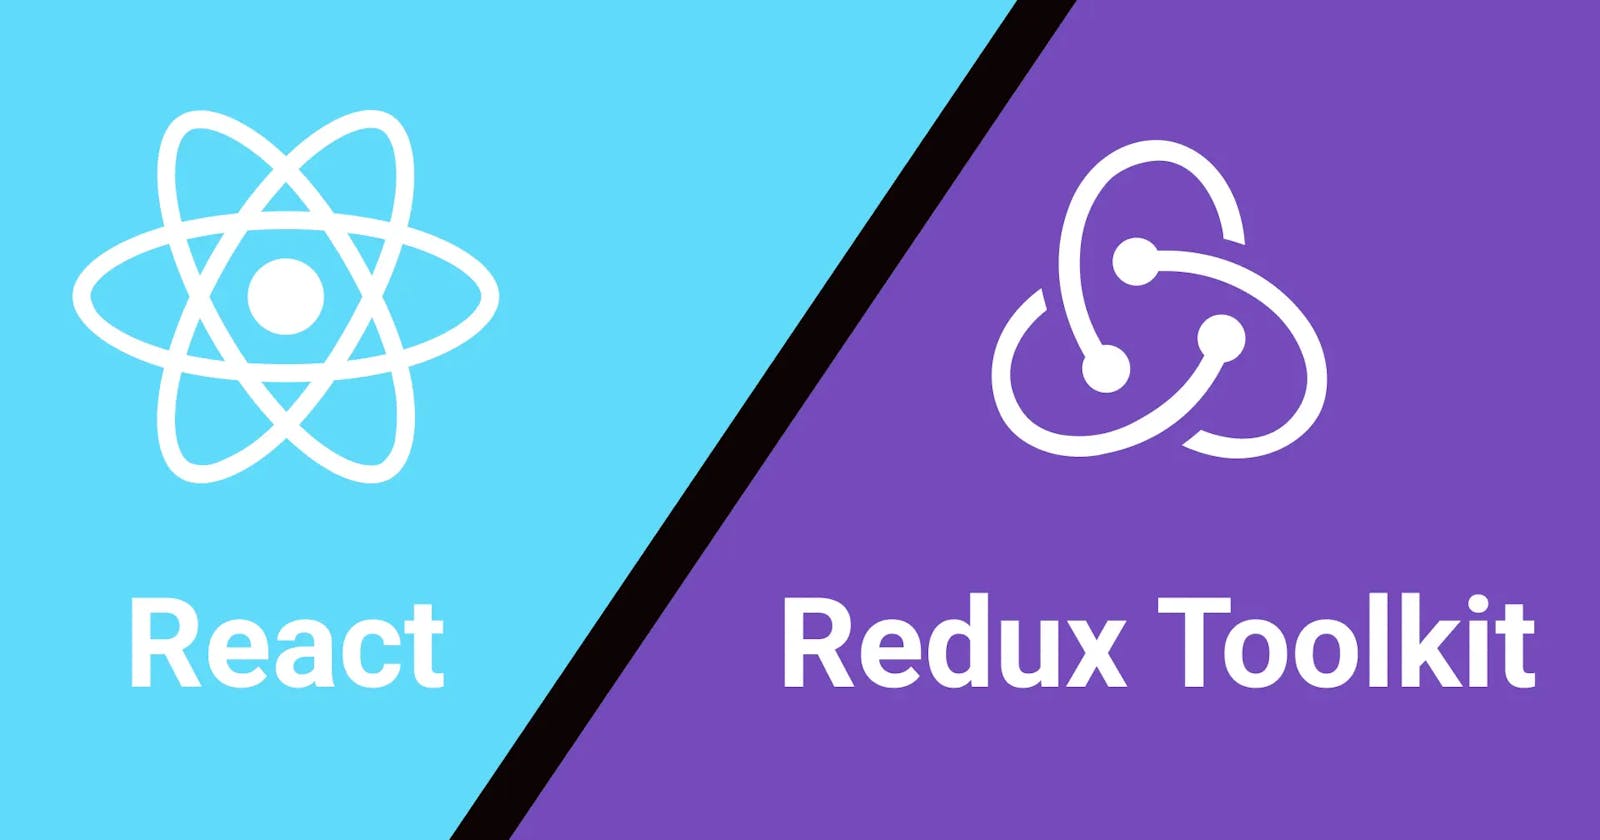 Exploring React-Redux, and Redux Toolkit: A Day of Learning